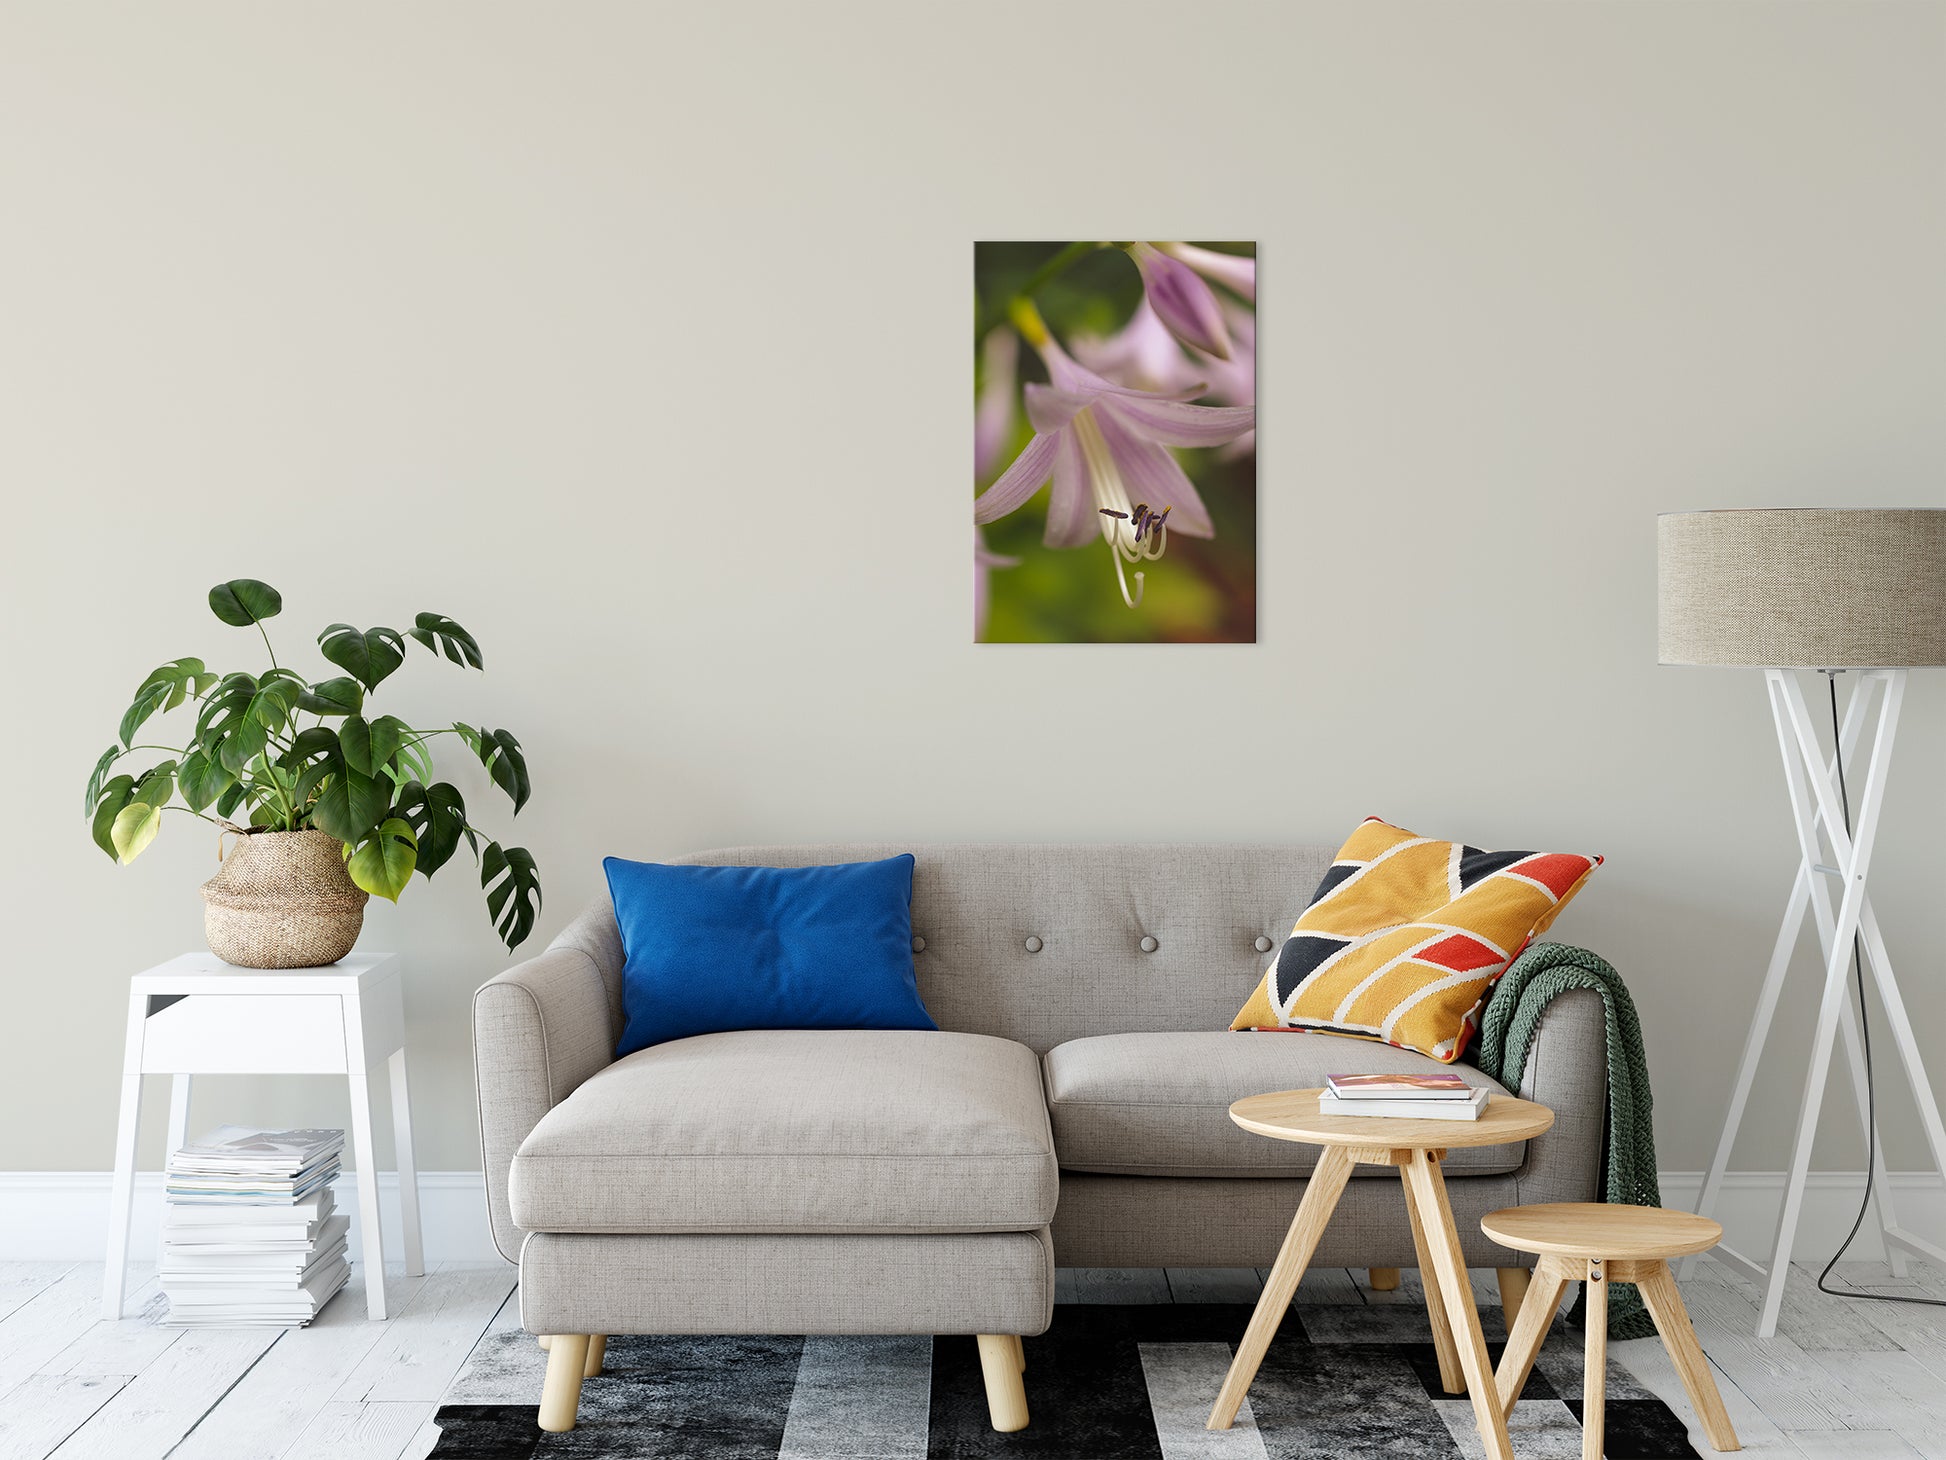 Close-up Hosta Bloom Nature / Floral Photo Fine Art Canvas Wall Art Prints 20" x 30" - PIPAFINEART